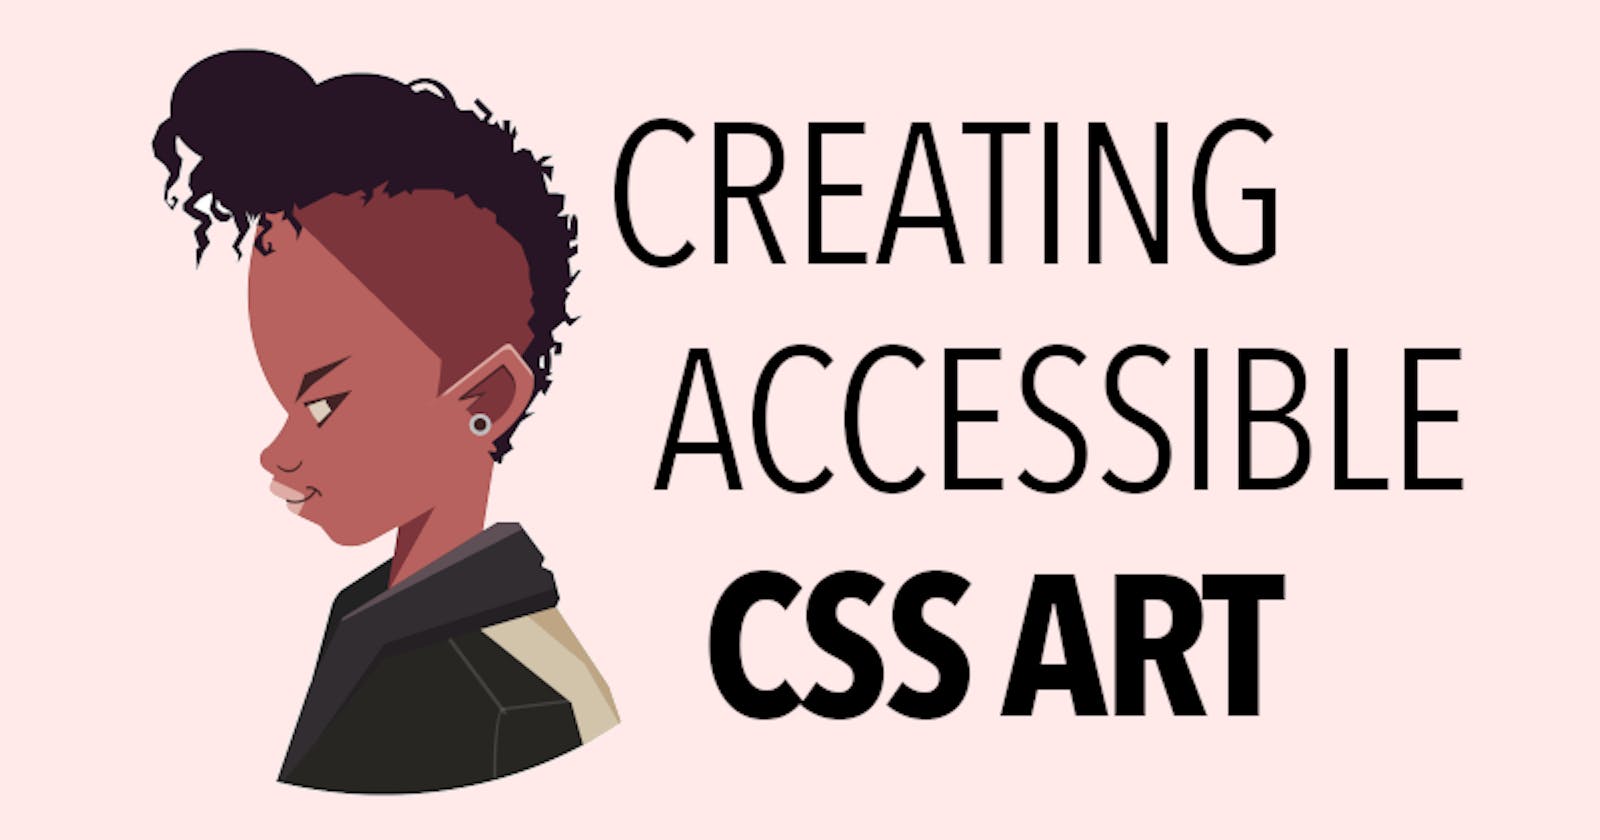 Creating accessible CSS art